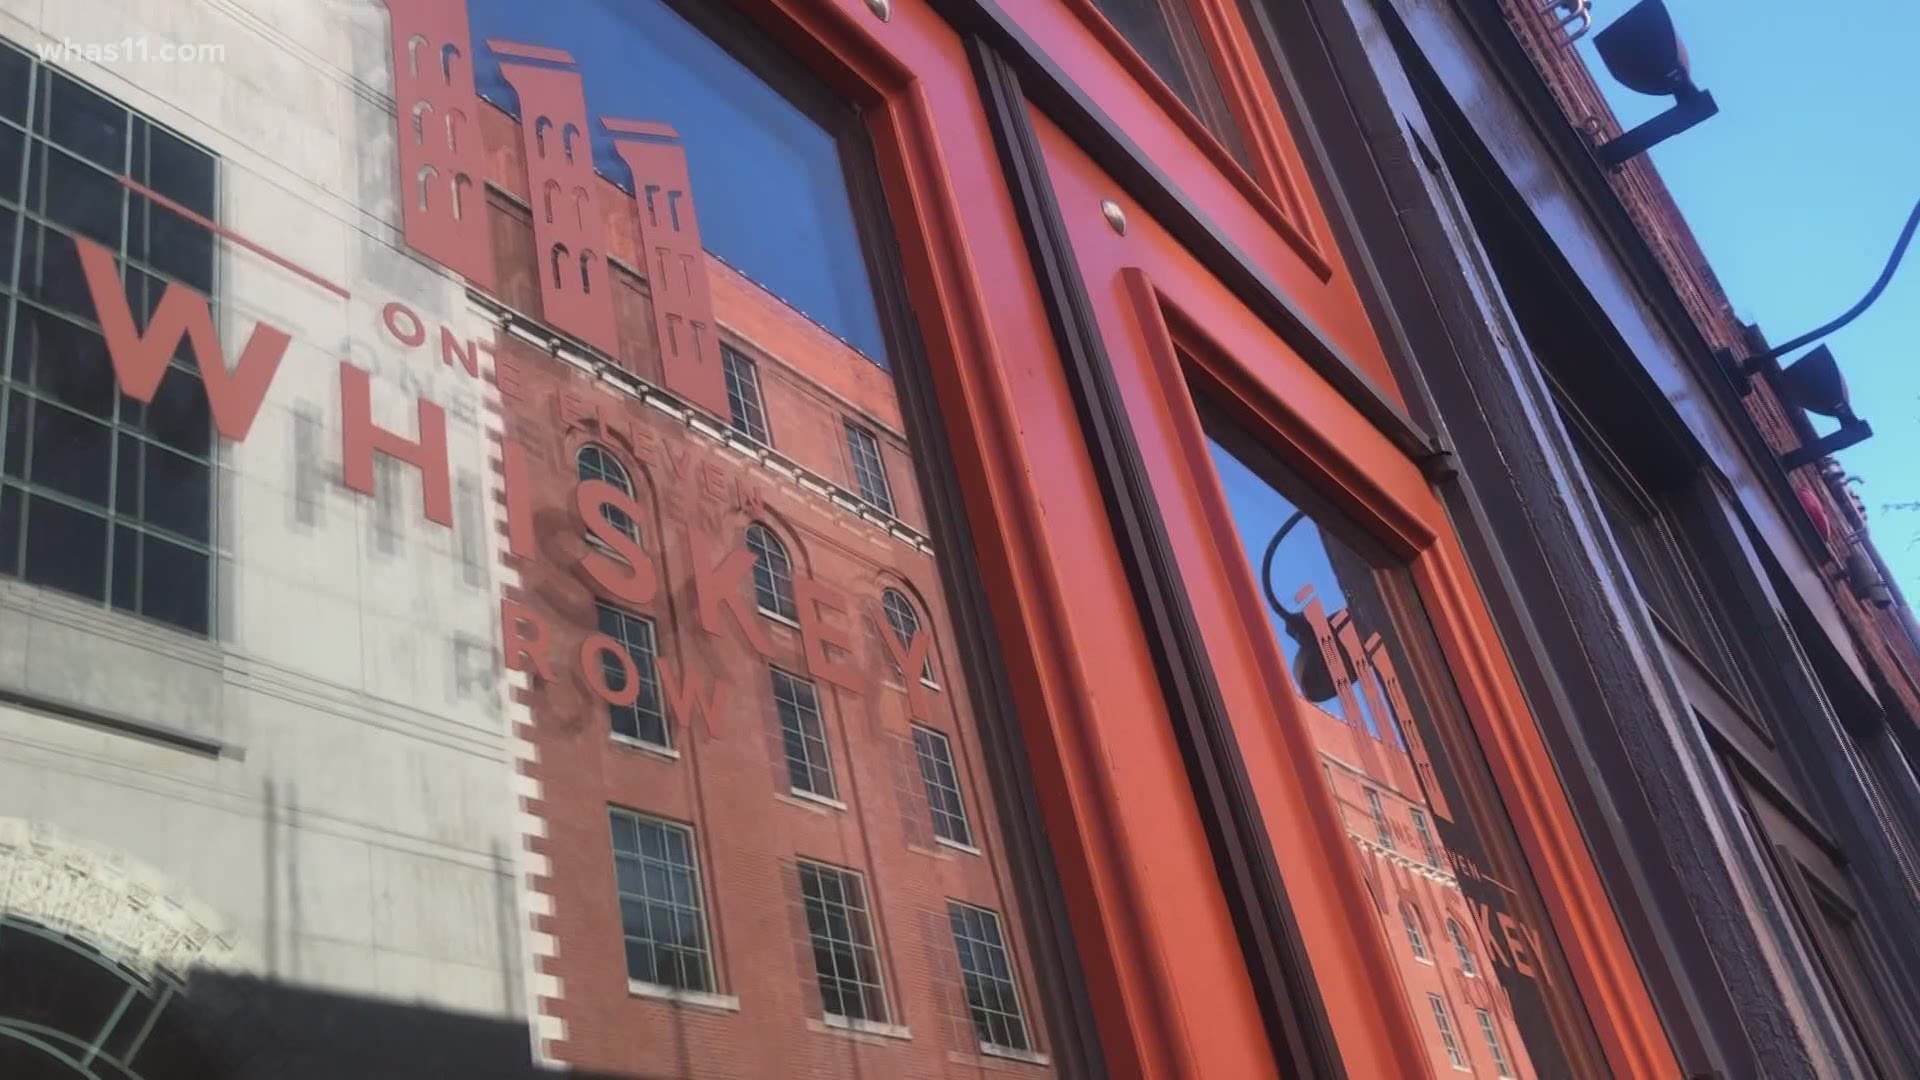 The warmer weather means more opportunities to get out. With some city attractions opening like museums and distilleries, Louisville tourism hopes to see an uptick.